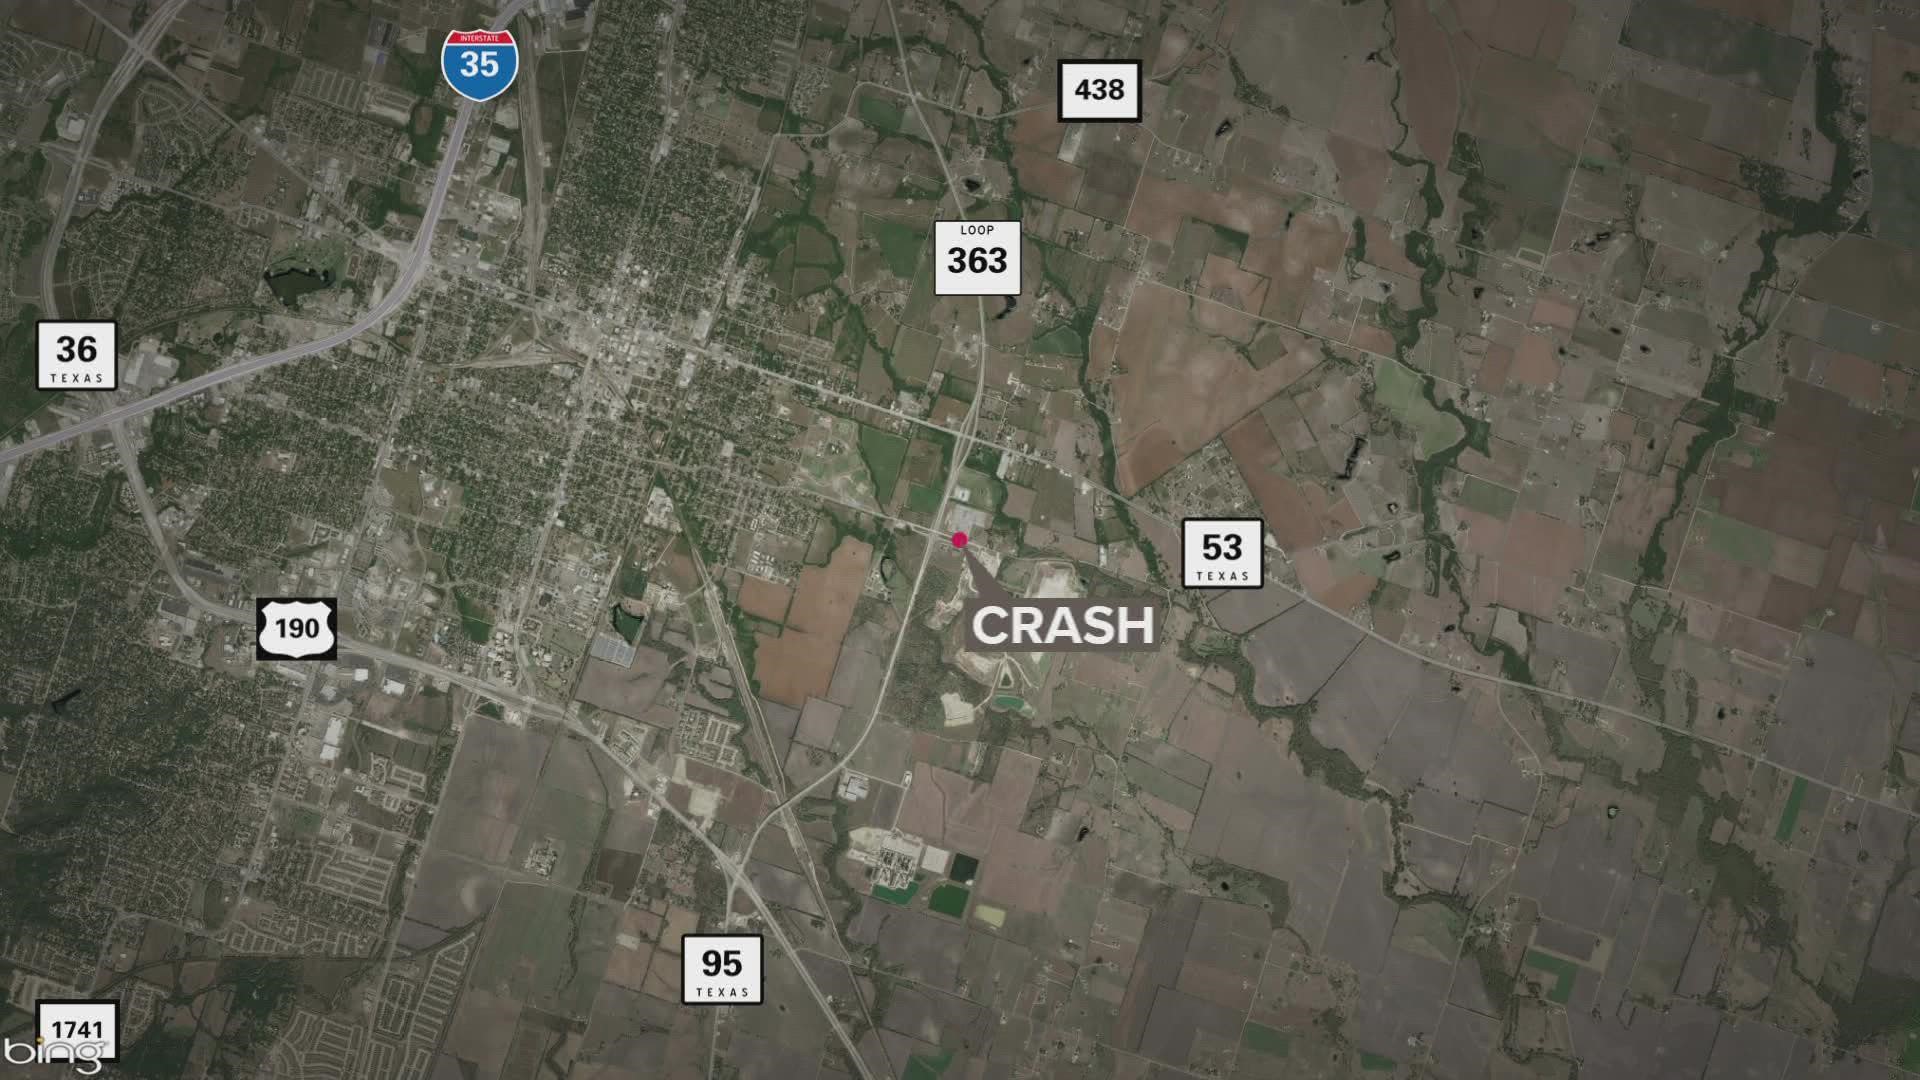 The crash reportedly happened Wednesday morning along E. Ave. H.